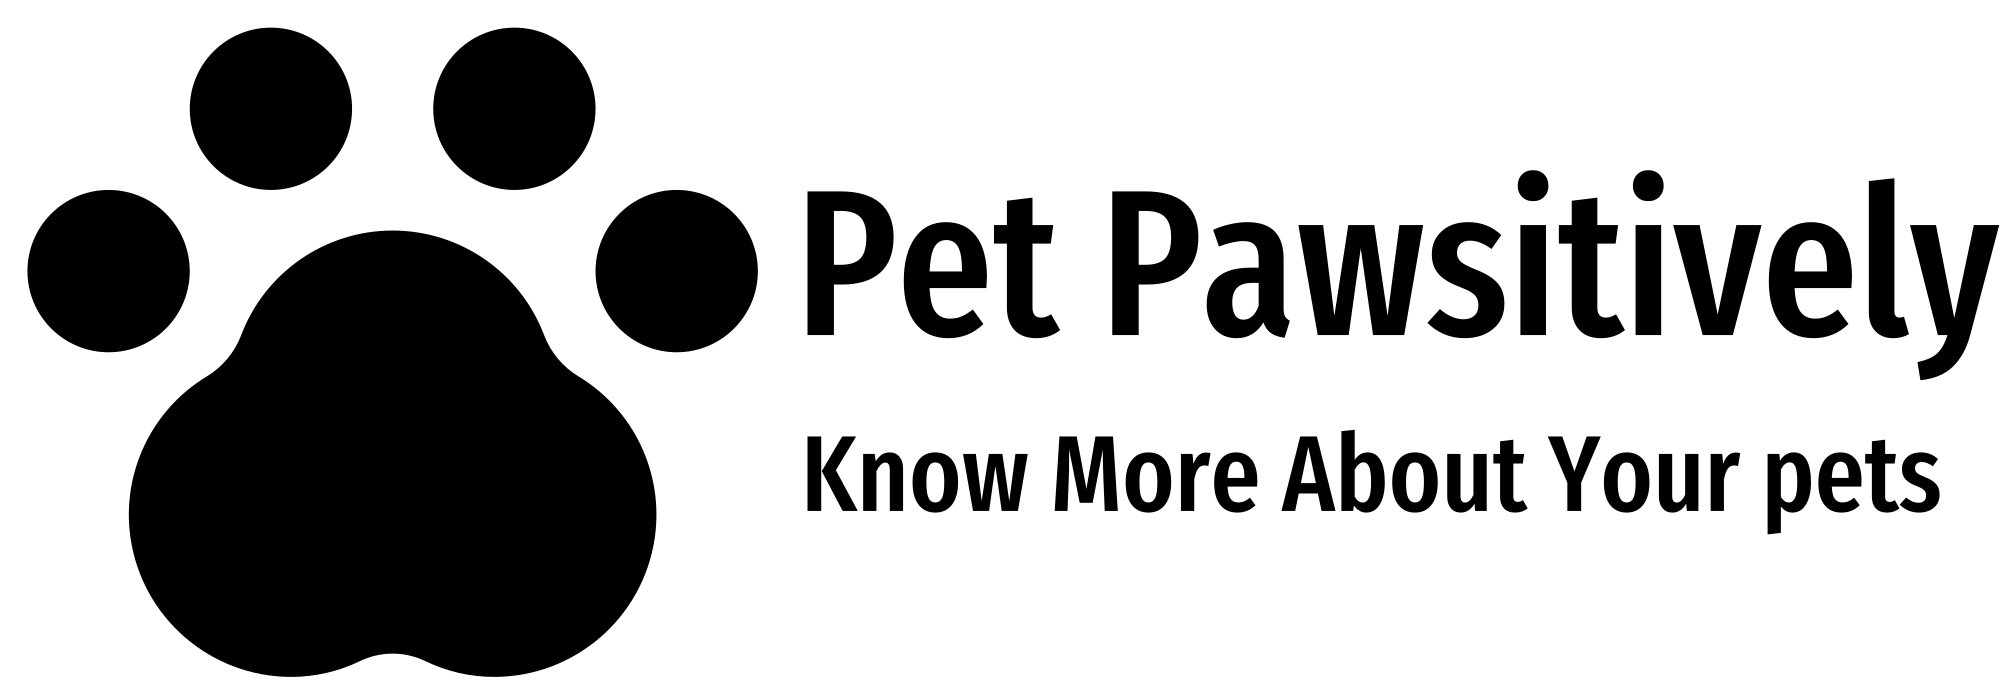 Pet Pawsitively